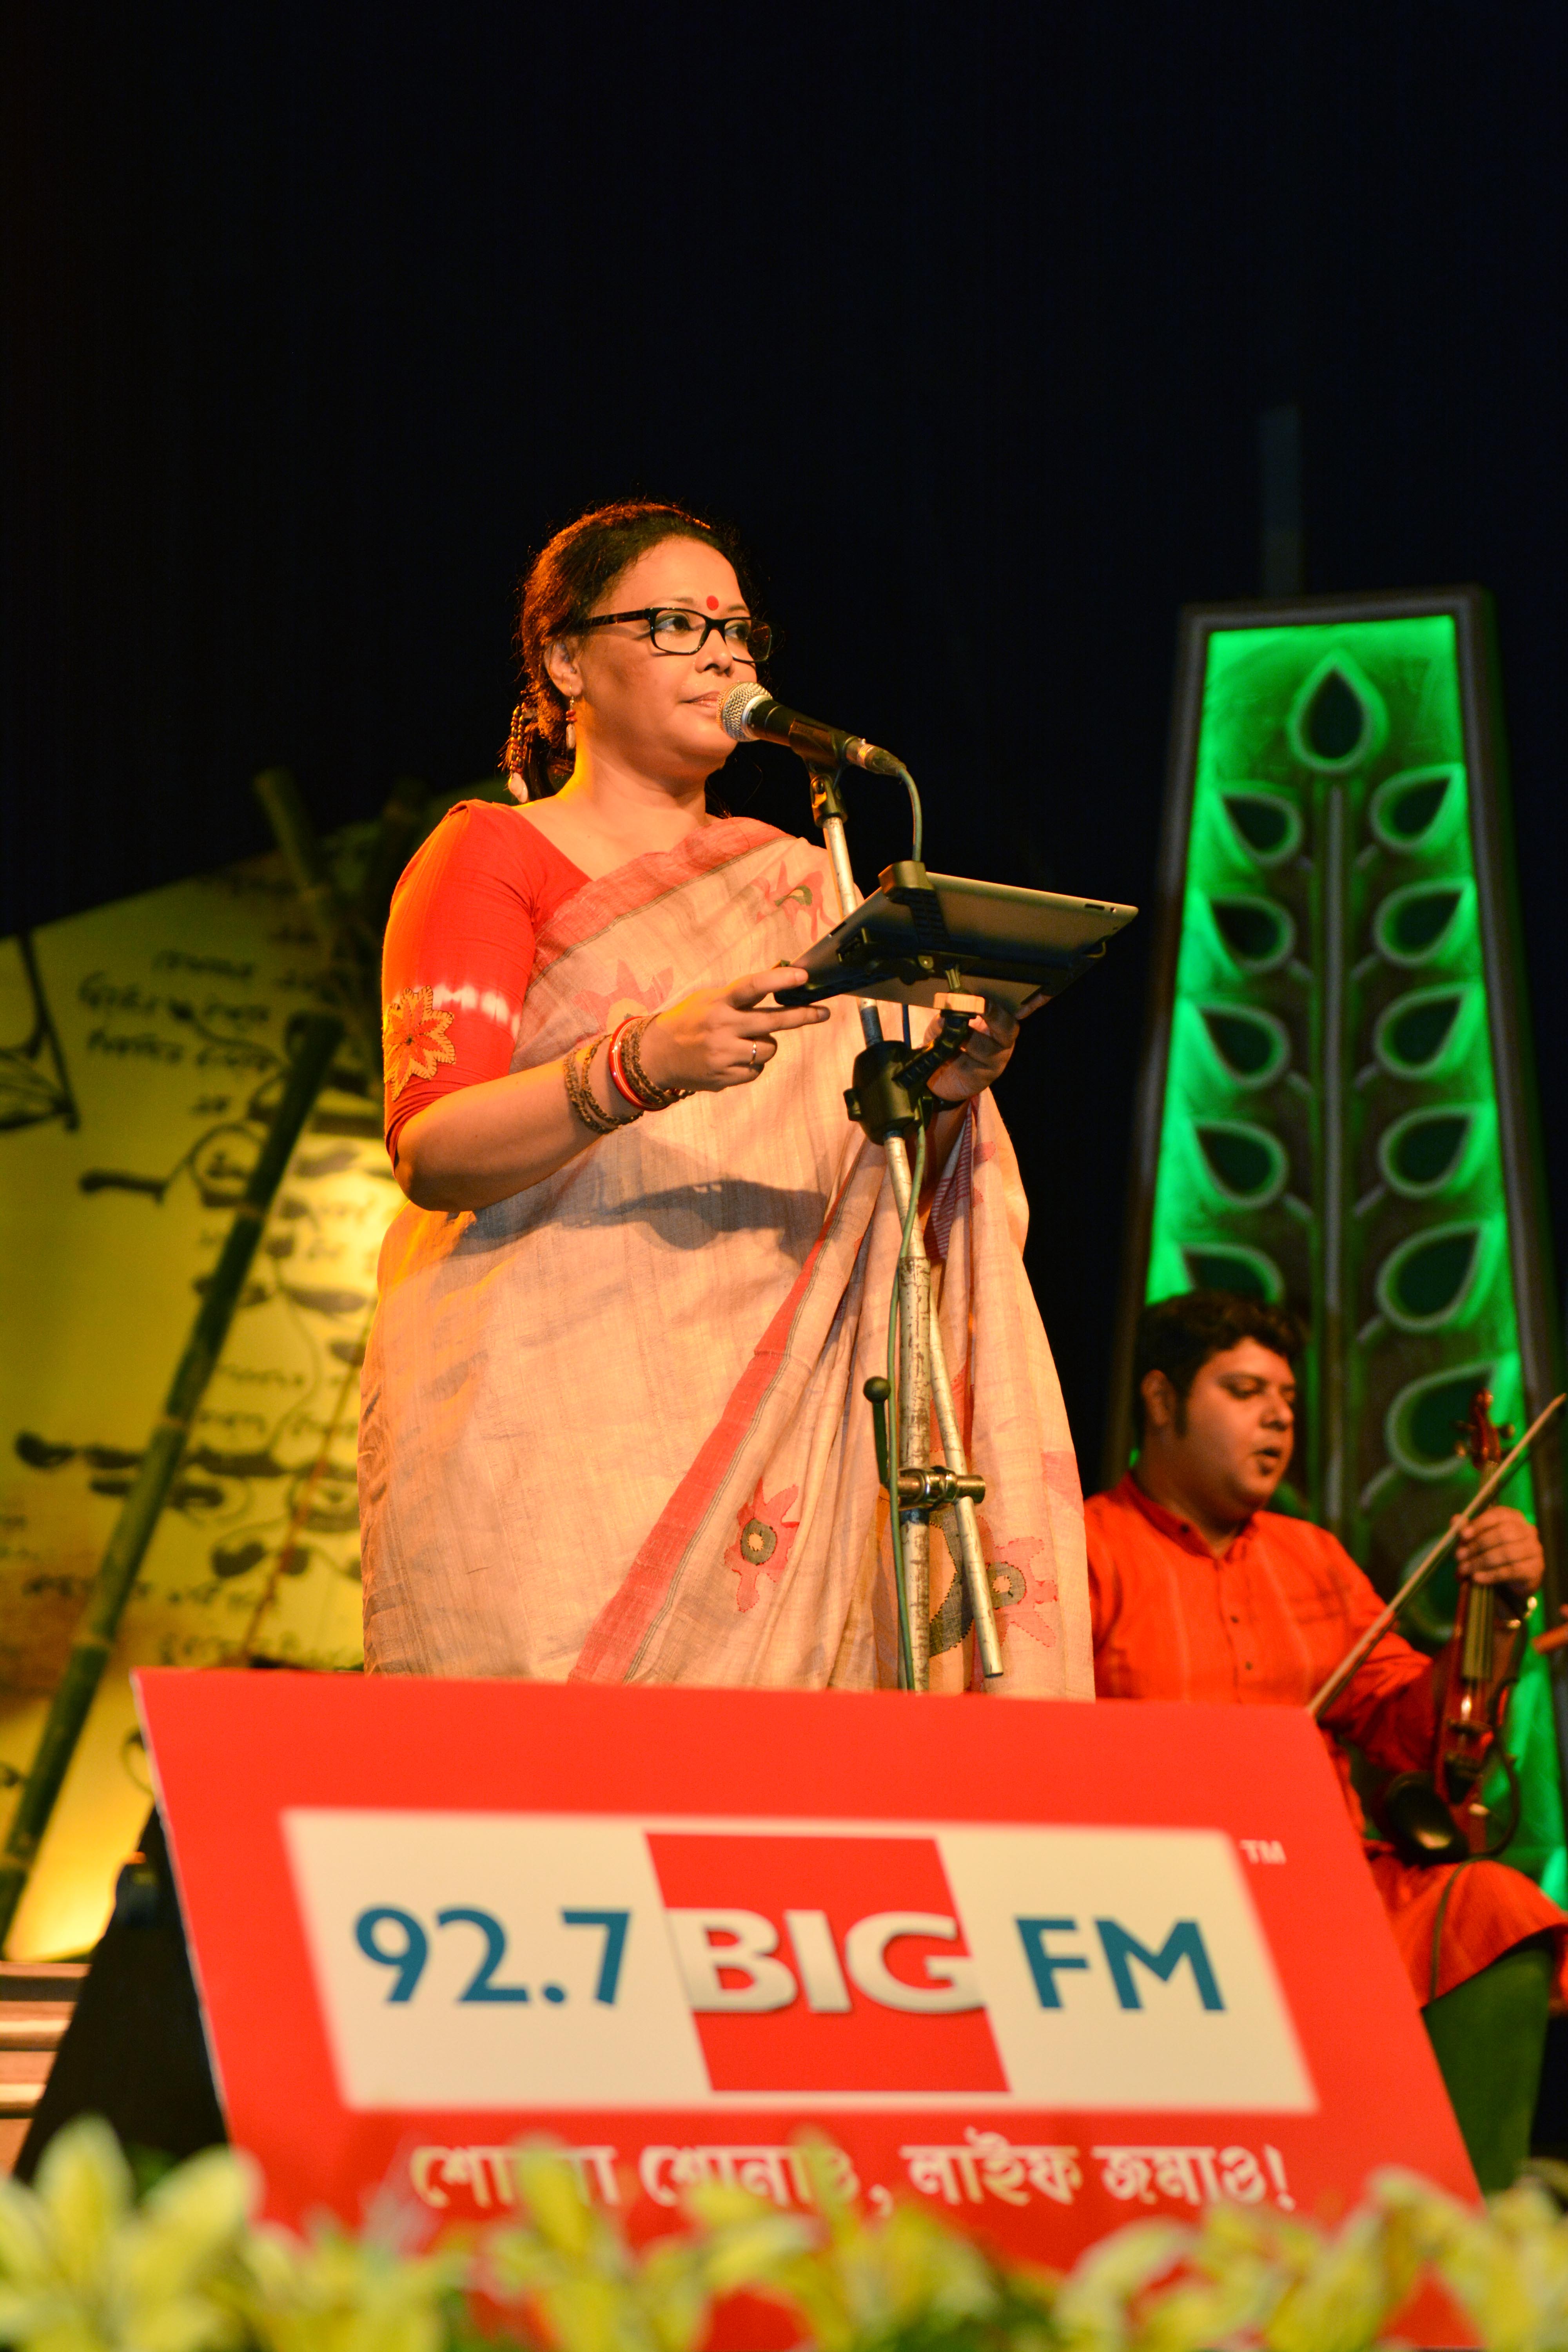 Singer Lopamudra Mitra performing at the event